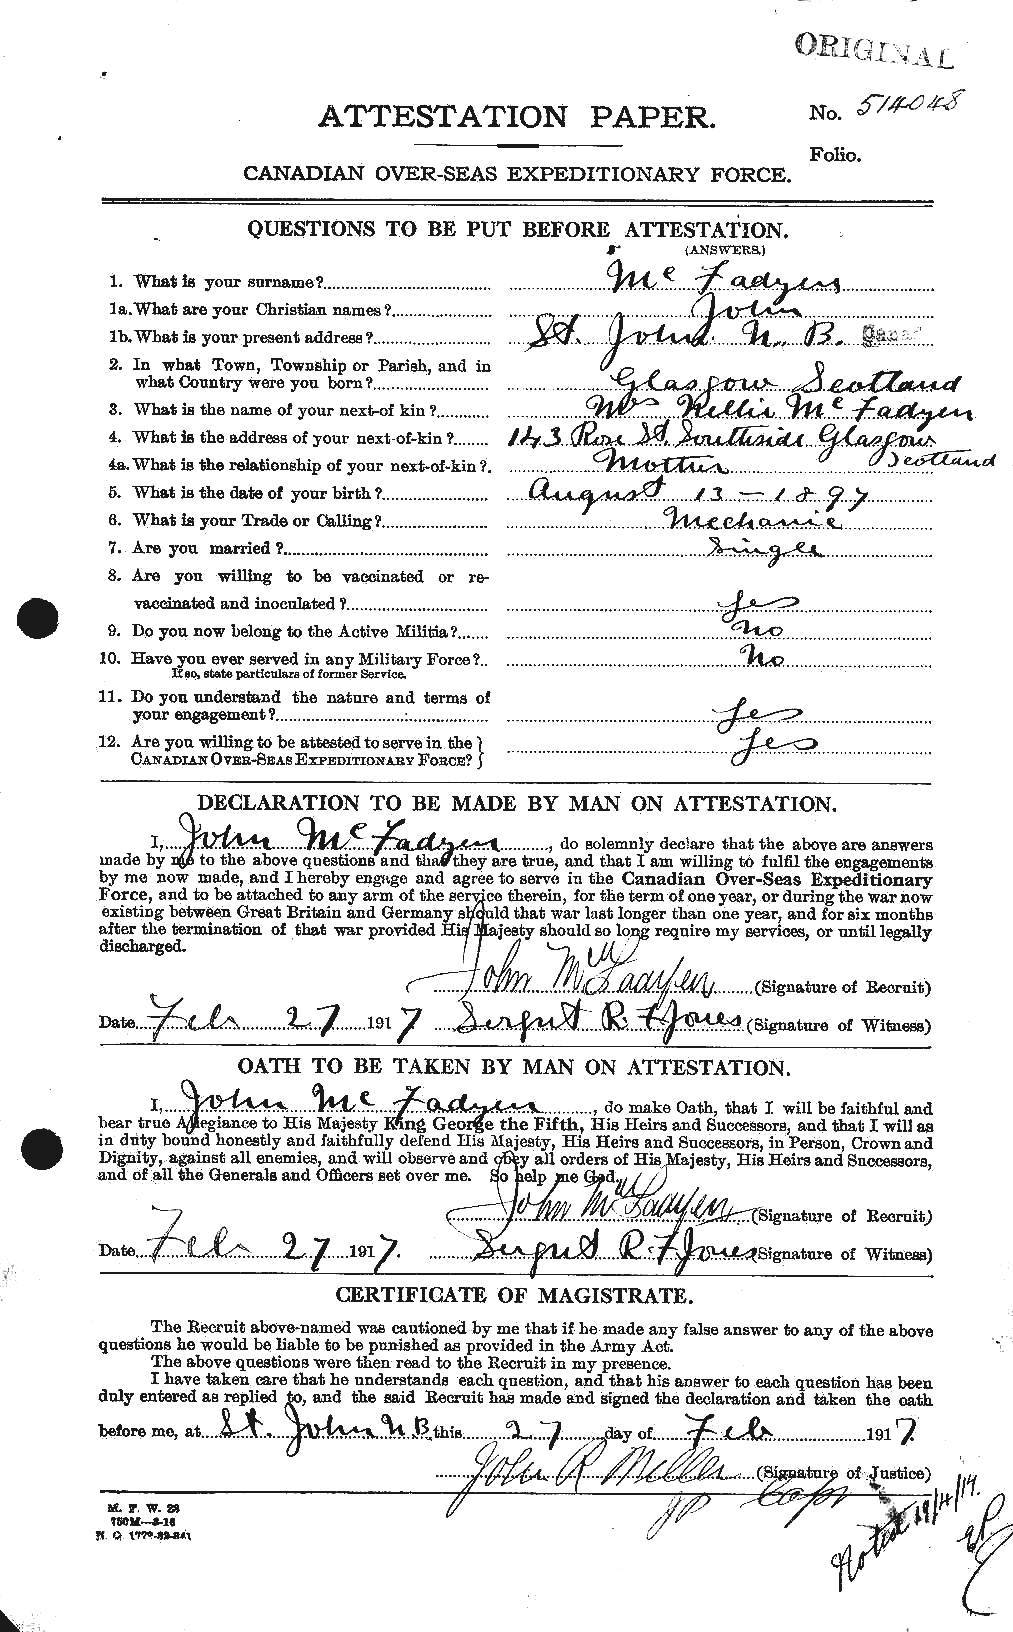 Personnel Records of the First World War - CEF 521183a